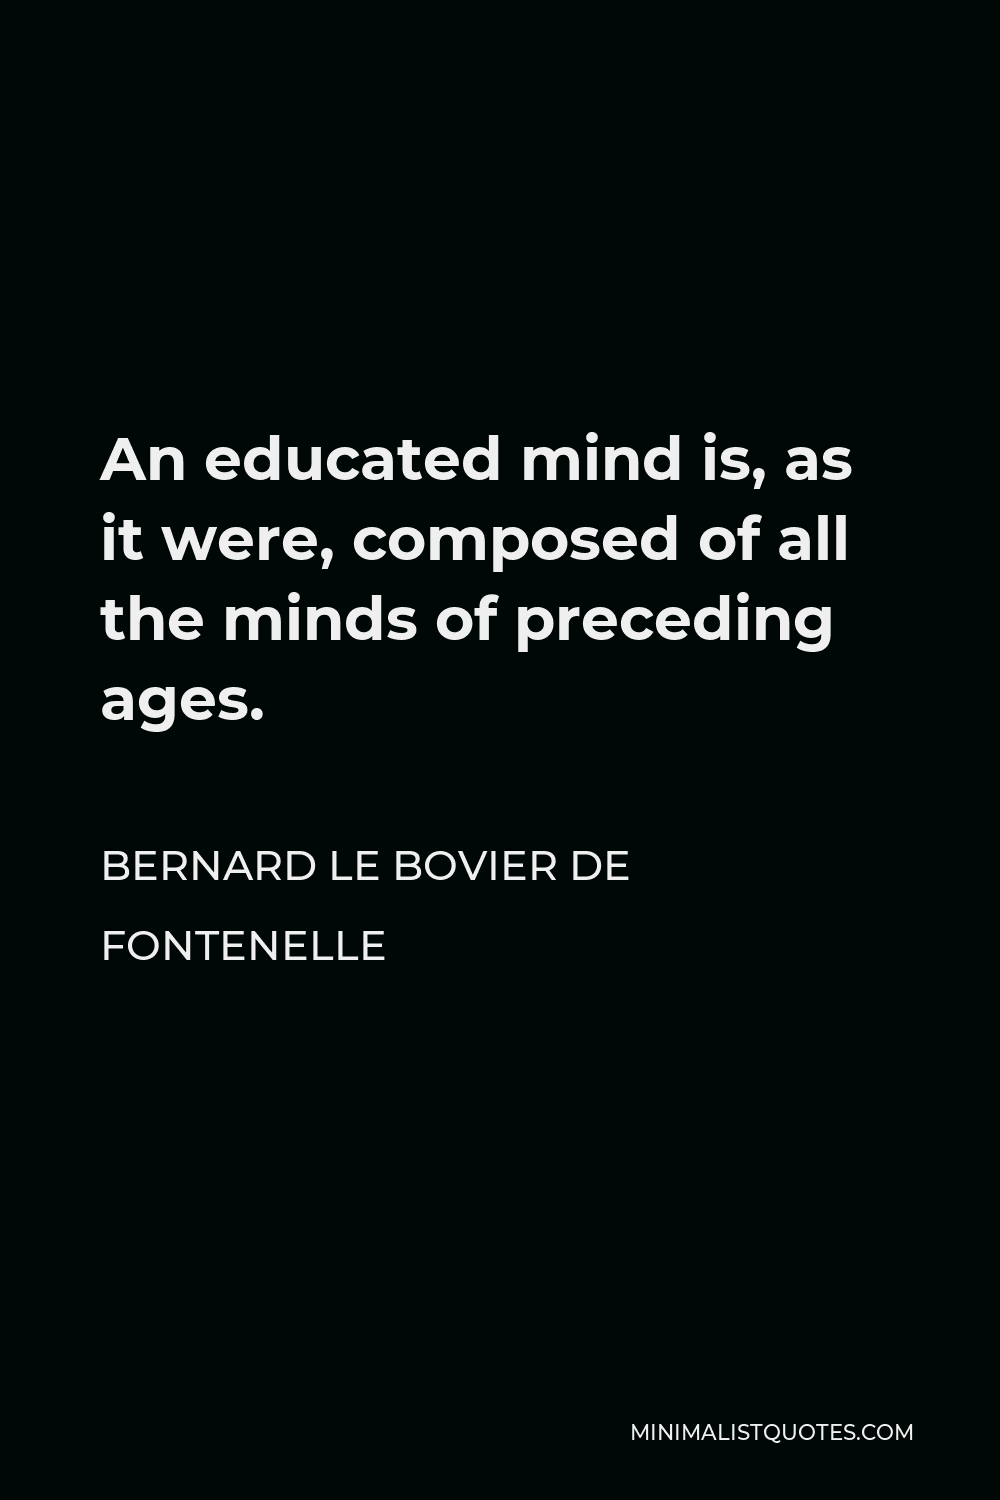 Bernard le Bovier de Fontenelle Quote - An educated mind is, as it were, composed of all the minds of preceding ages.